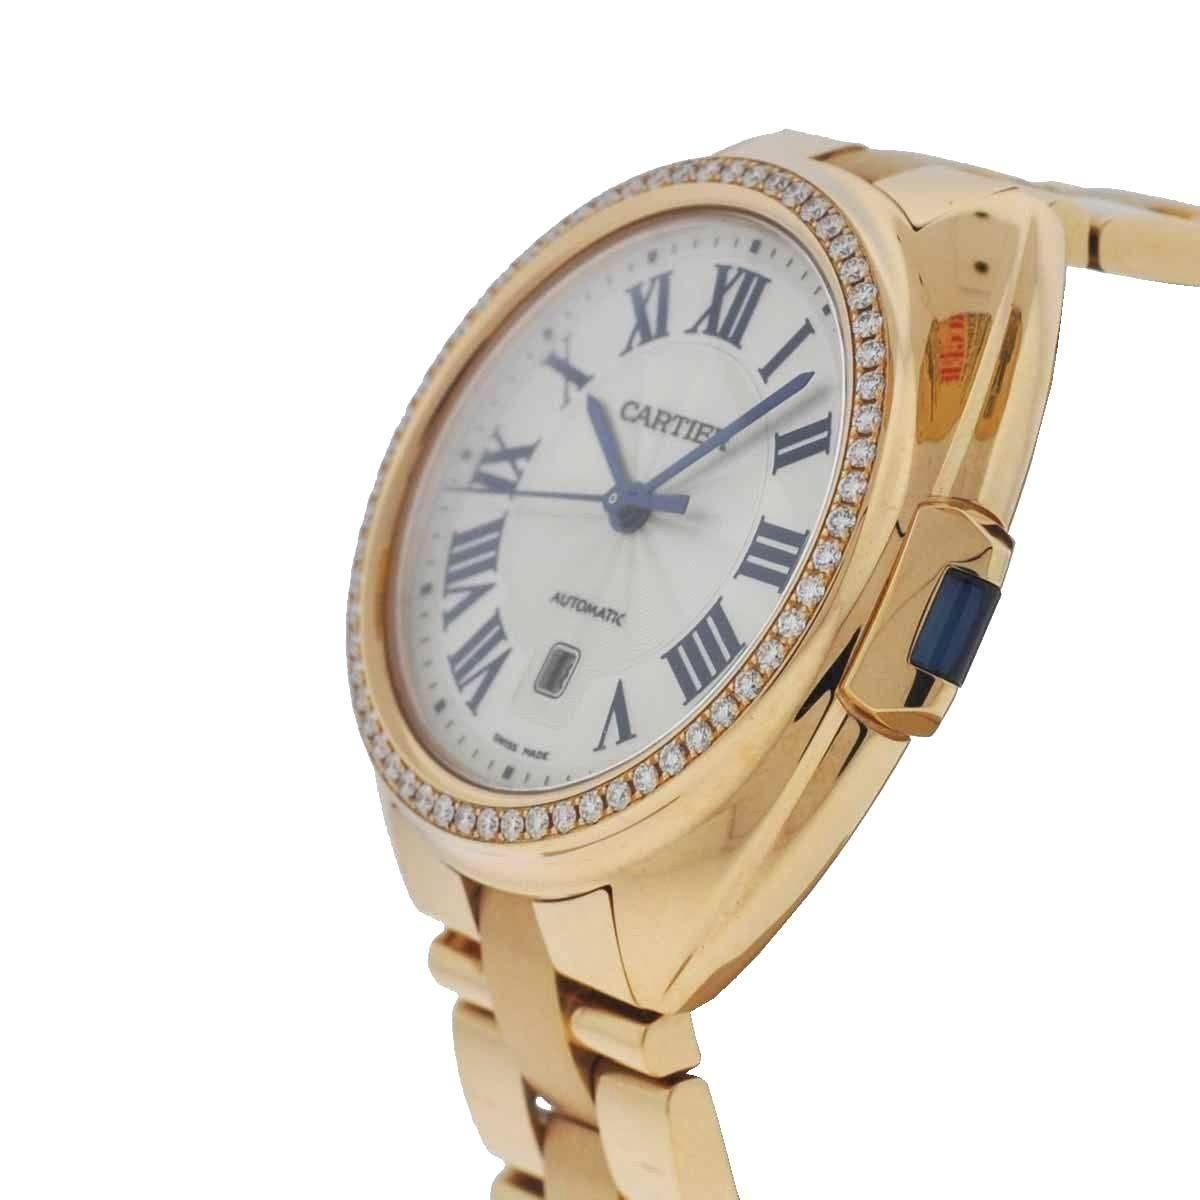 Company - Cartier
Model - Cle de Cartier WJCL0003
Case Metal - 18k Rose Gold
Case Measurement - 35mm
Bracelet - 18k Rose Gold with Double Deployment Clasp
Dial - Silvered
Bezel - 18k Rose Gold Fitted with Factory Original Diamonds
Crystal - Scratch